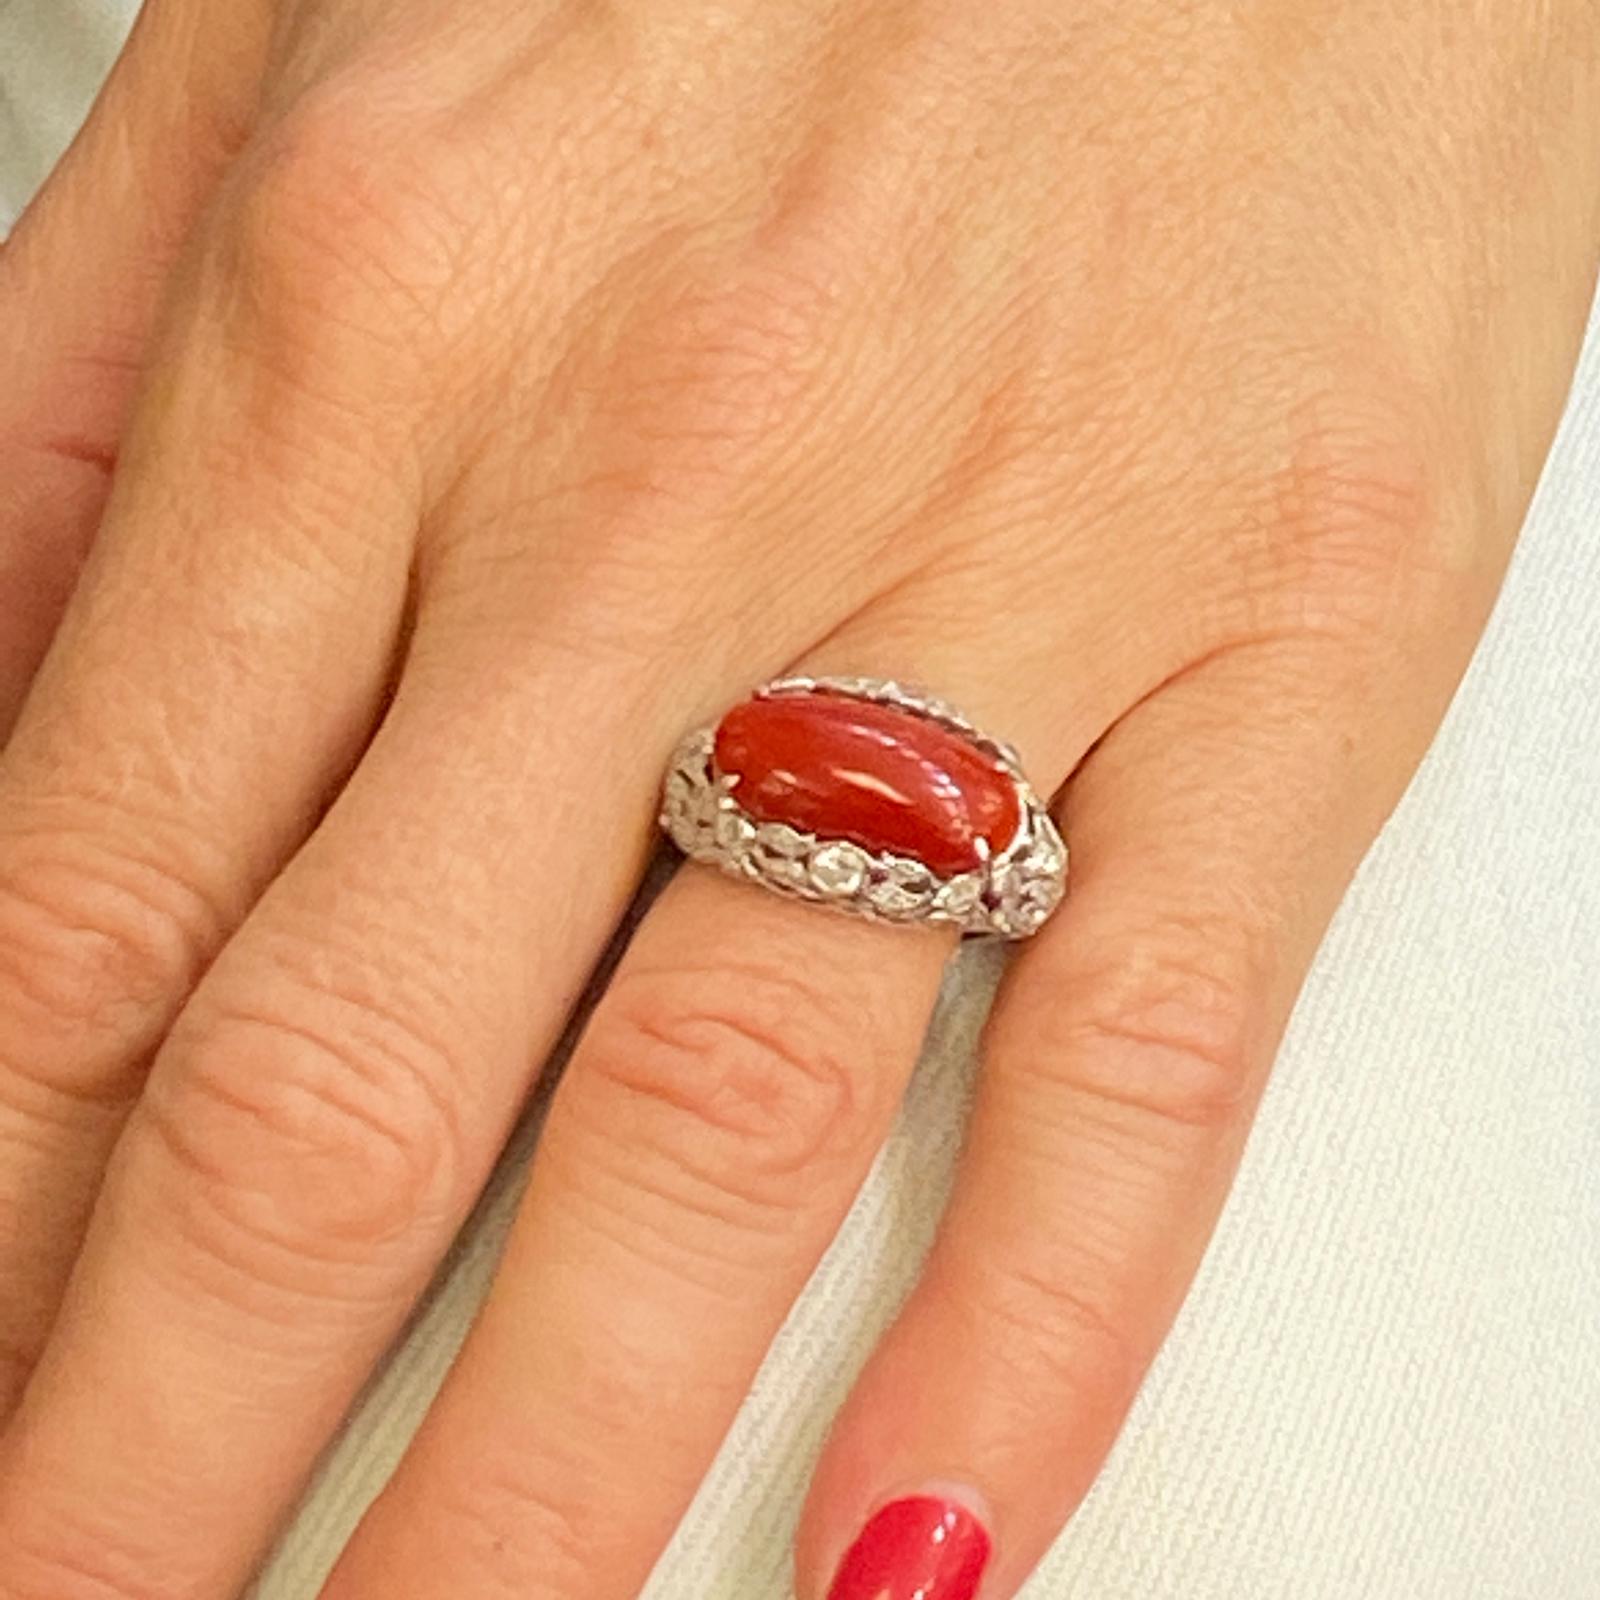 Gorgeous Ox Blood Coral and Old European Cut Diamonds shine in this Original Art Deco Ring. The open filigree diamond shank is beautifully crafted and set with a 10 x 20mm coral gemstone set east to west. There are approximately 1.00 carat total